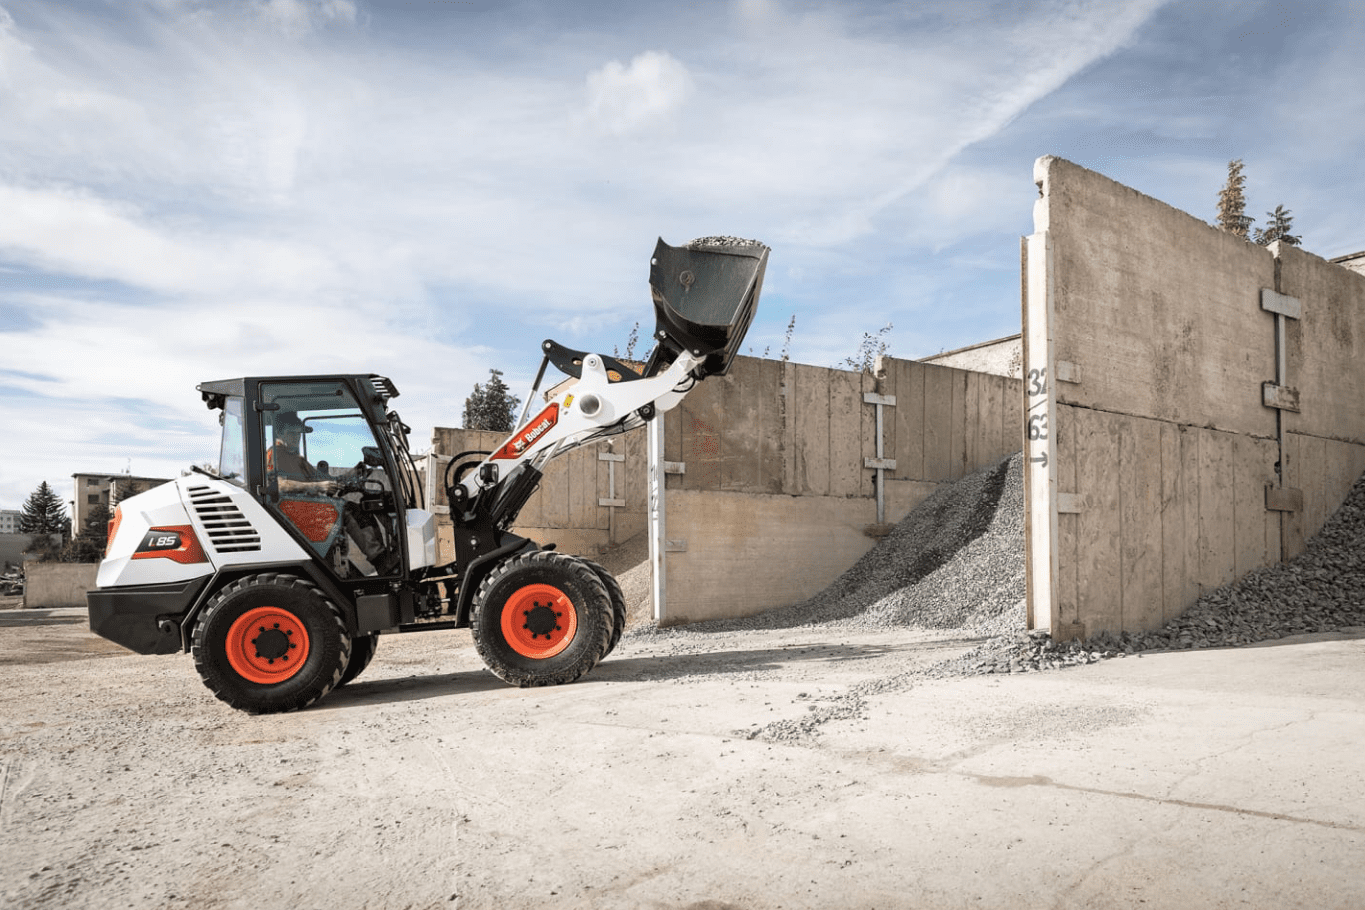 Browse Specs and more for the Bobcat L85 Compact Wheel Loader - Bobcat of Indy